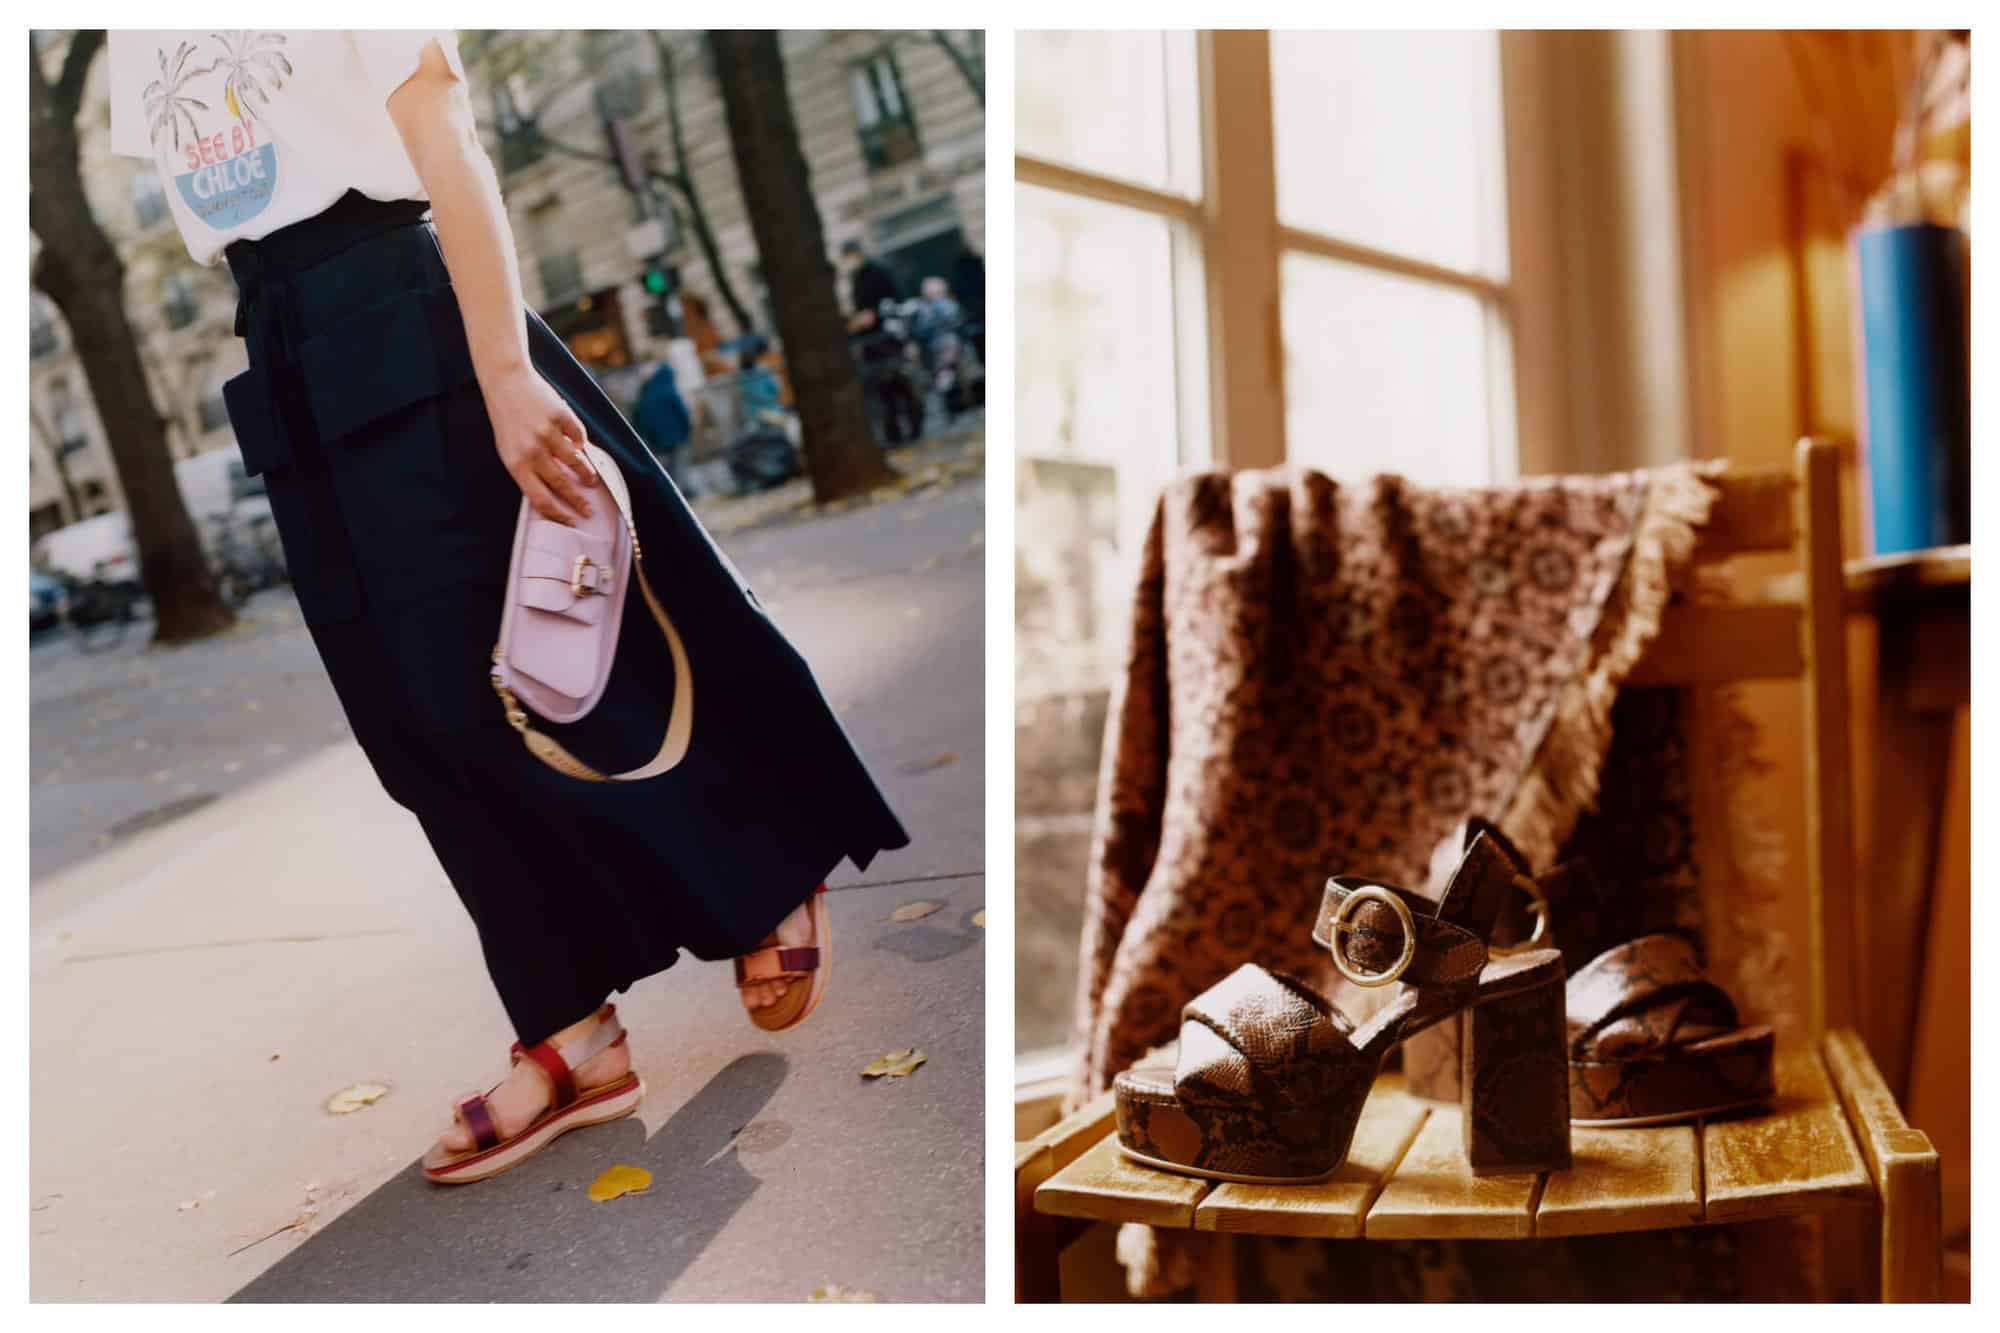 Left: a woman on a Paris street wearing a t-shirt with See by Chloe on the front, a long skirt, sandals and carrying a handbag. Right: a pair of platform brown leather sandal high heels sitting on a wooden chair with a scarf draped over the back. 